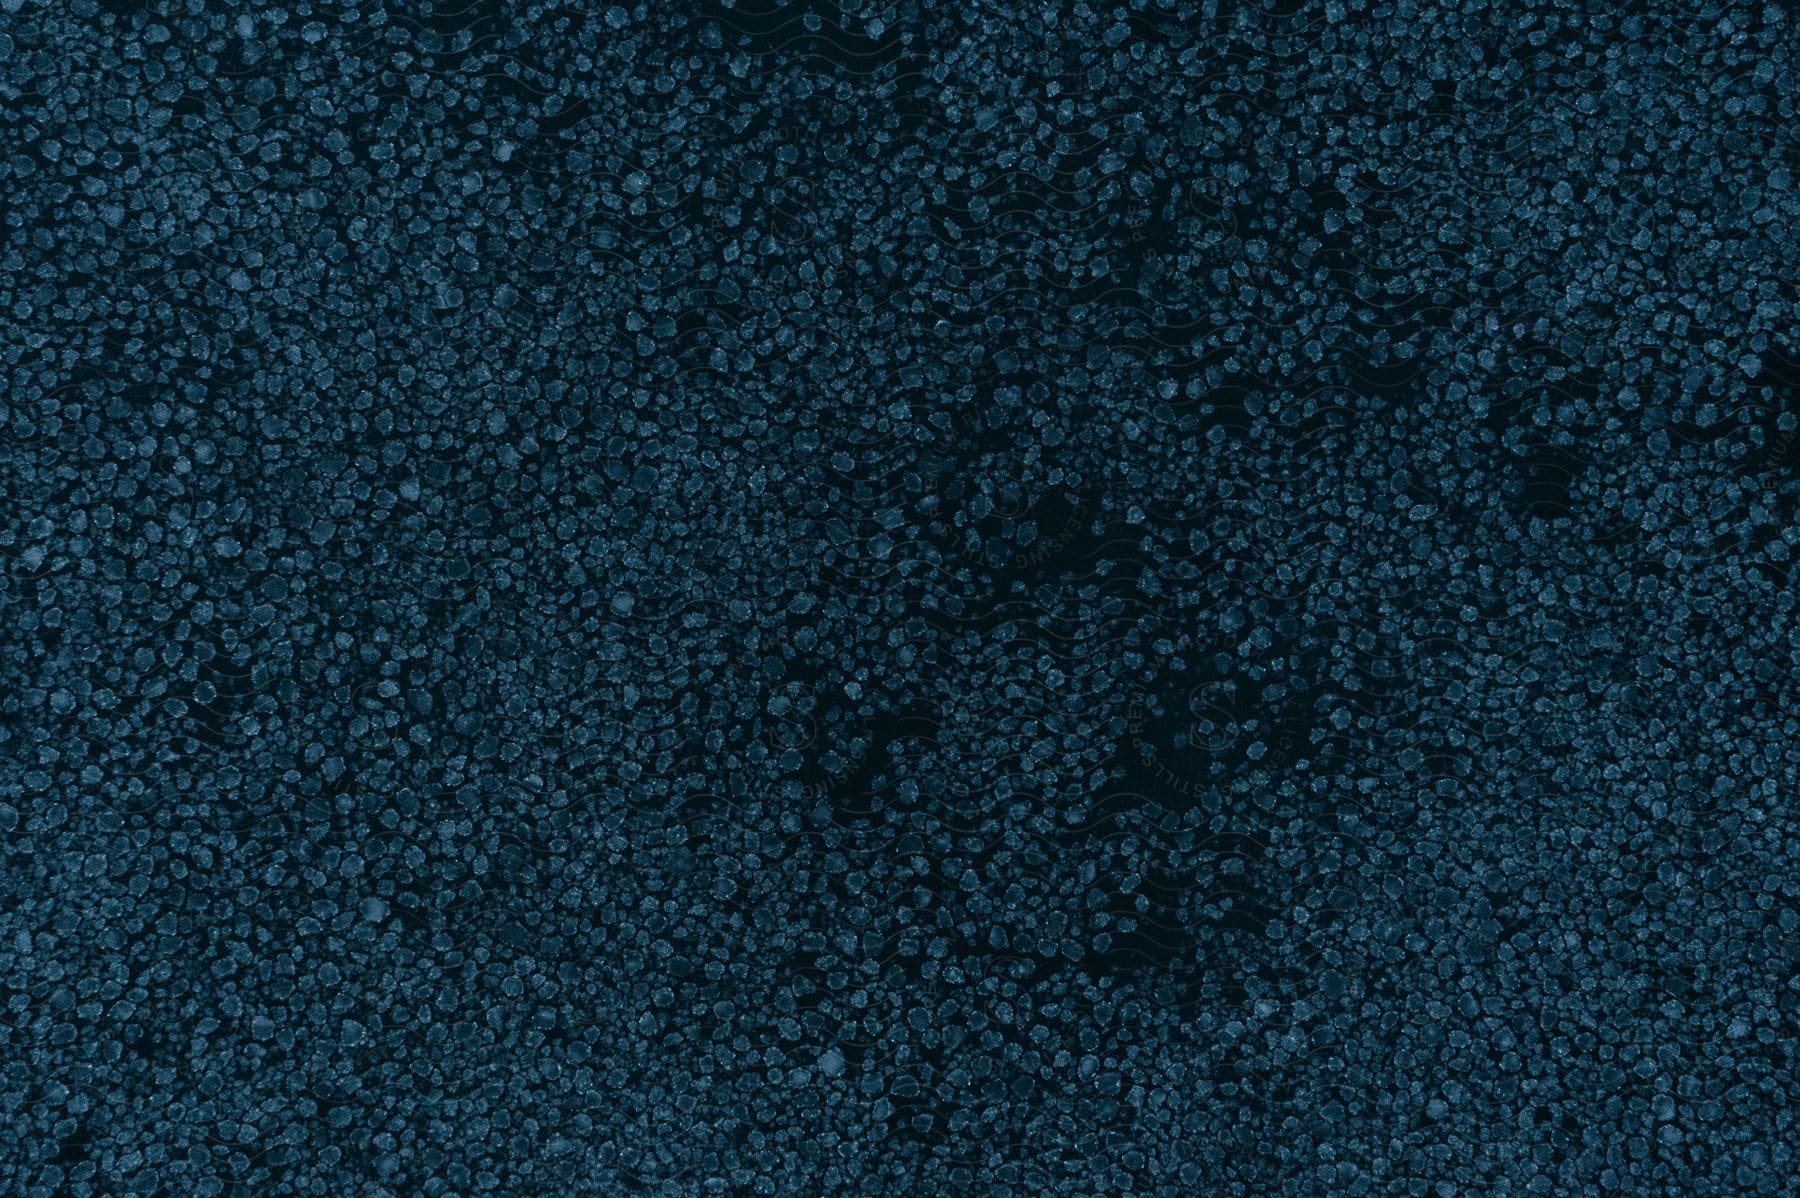 Nighttime view of a landscape with blue bubbles scattered throughout